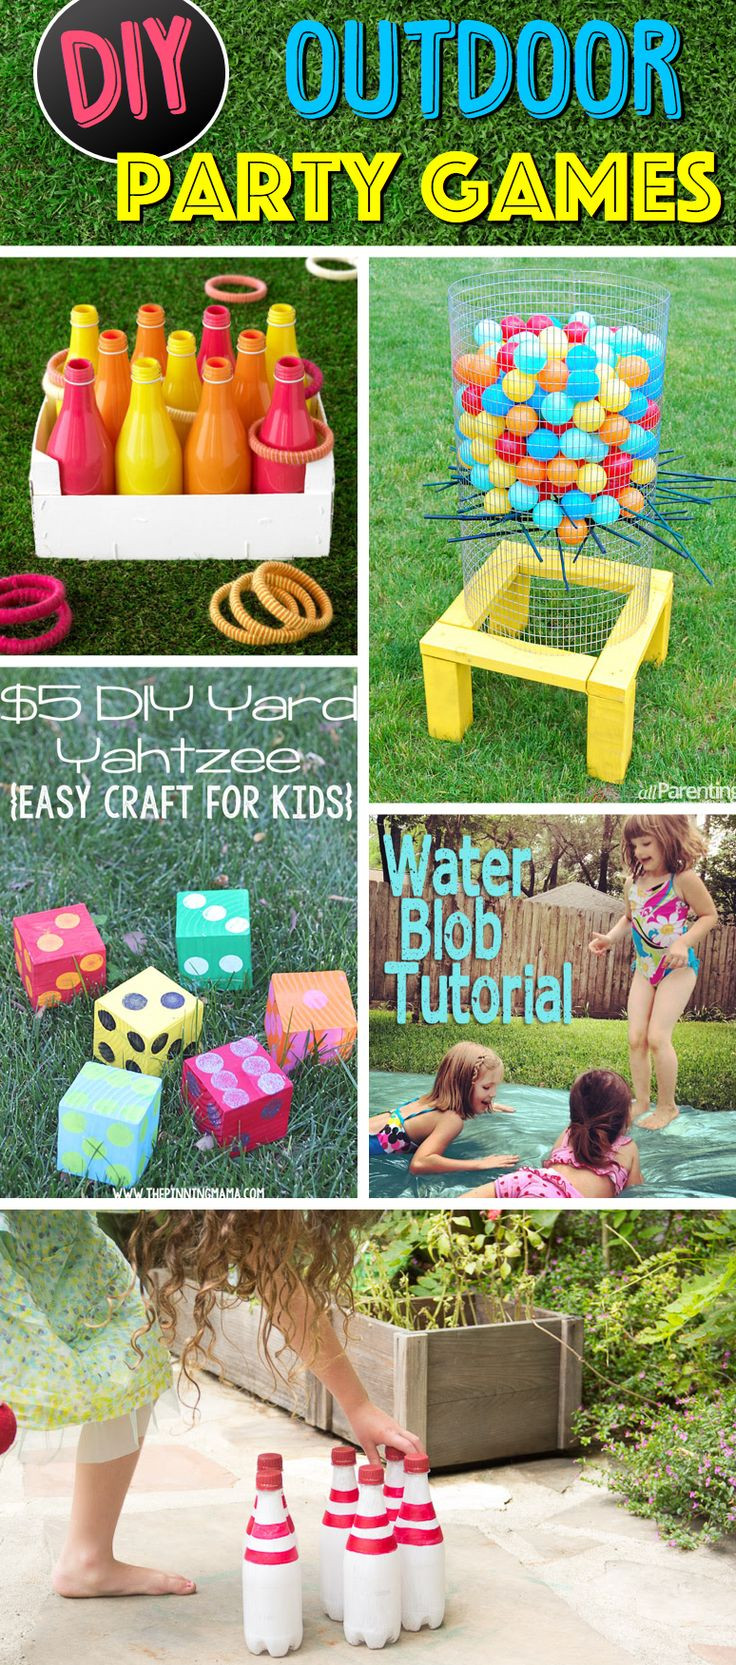 Backyard Party Games Ideas
 Best 25 Family outdoor games ideas on Pinterest